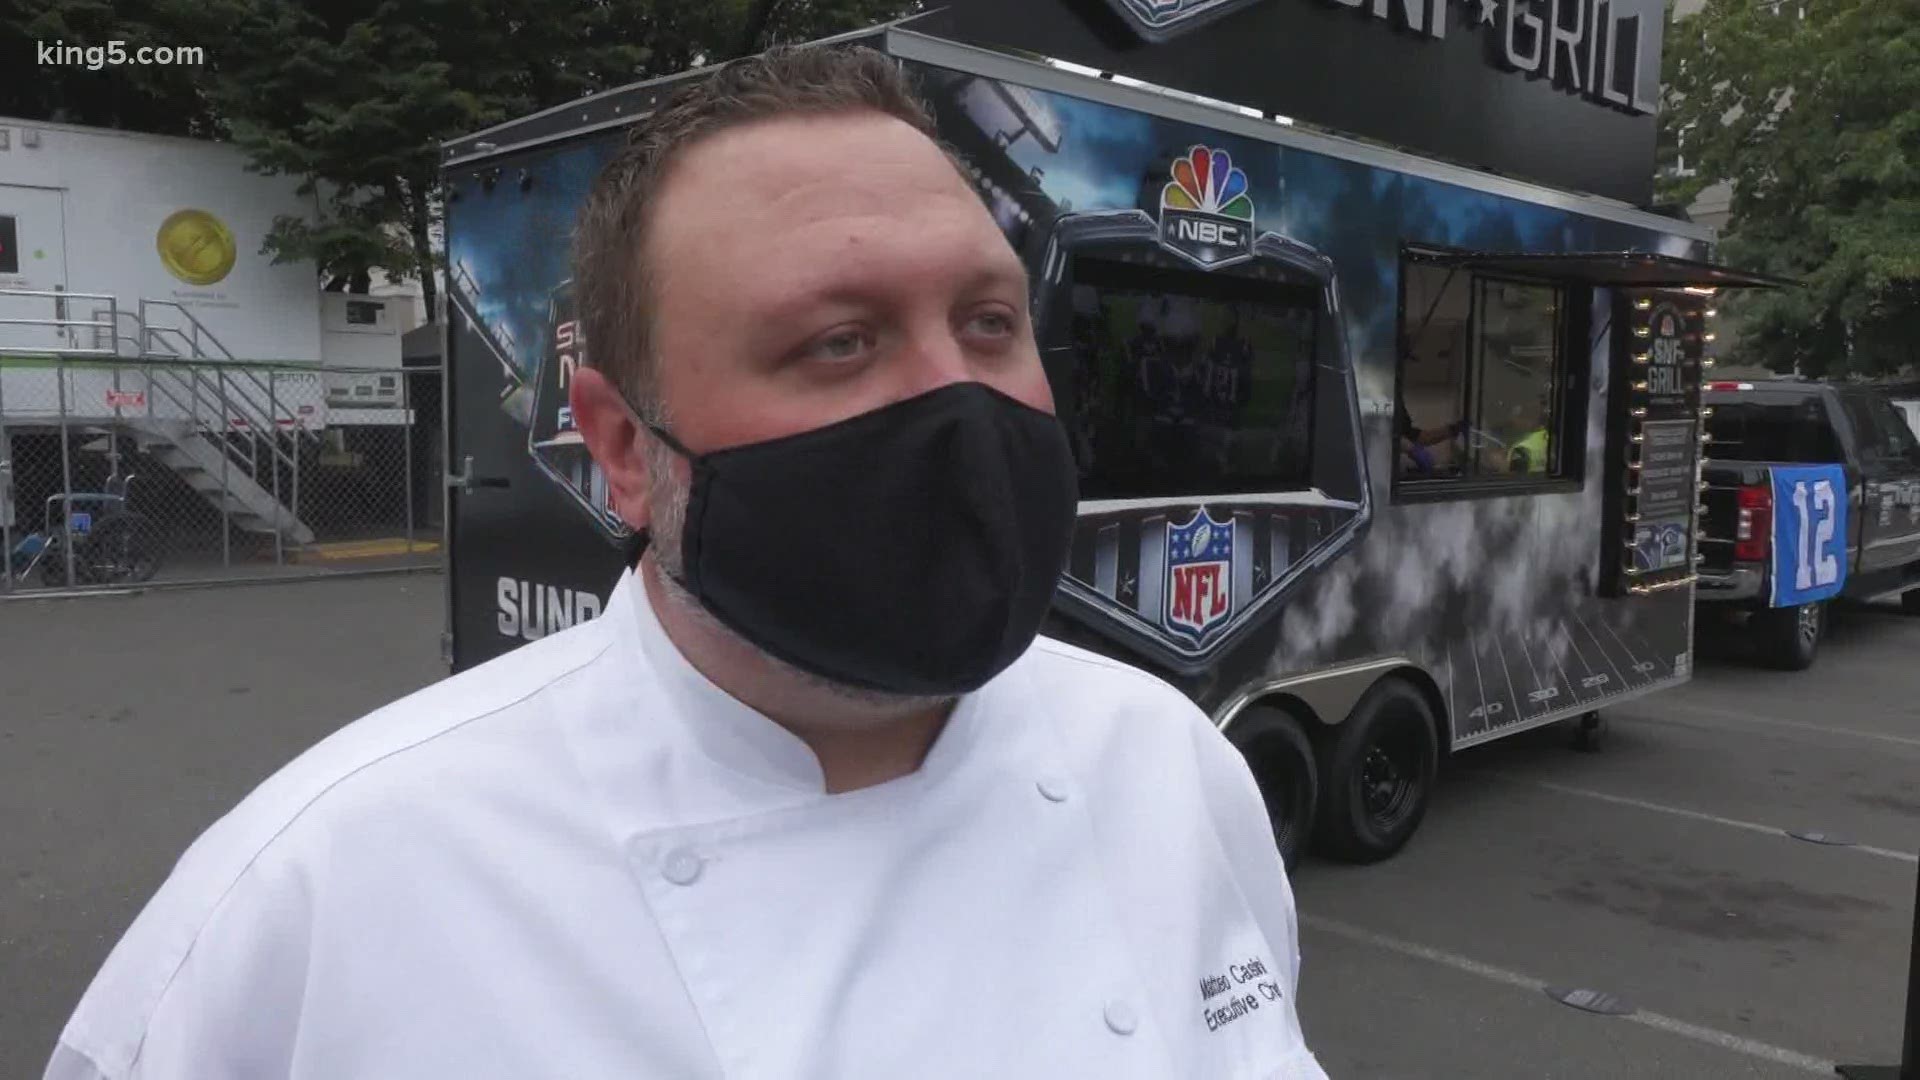 The Sunday Night Football Grill made a stop in Washington and served up dishes to Virginia Mason staff and Renton firefighters.